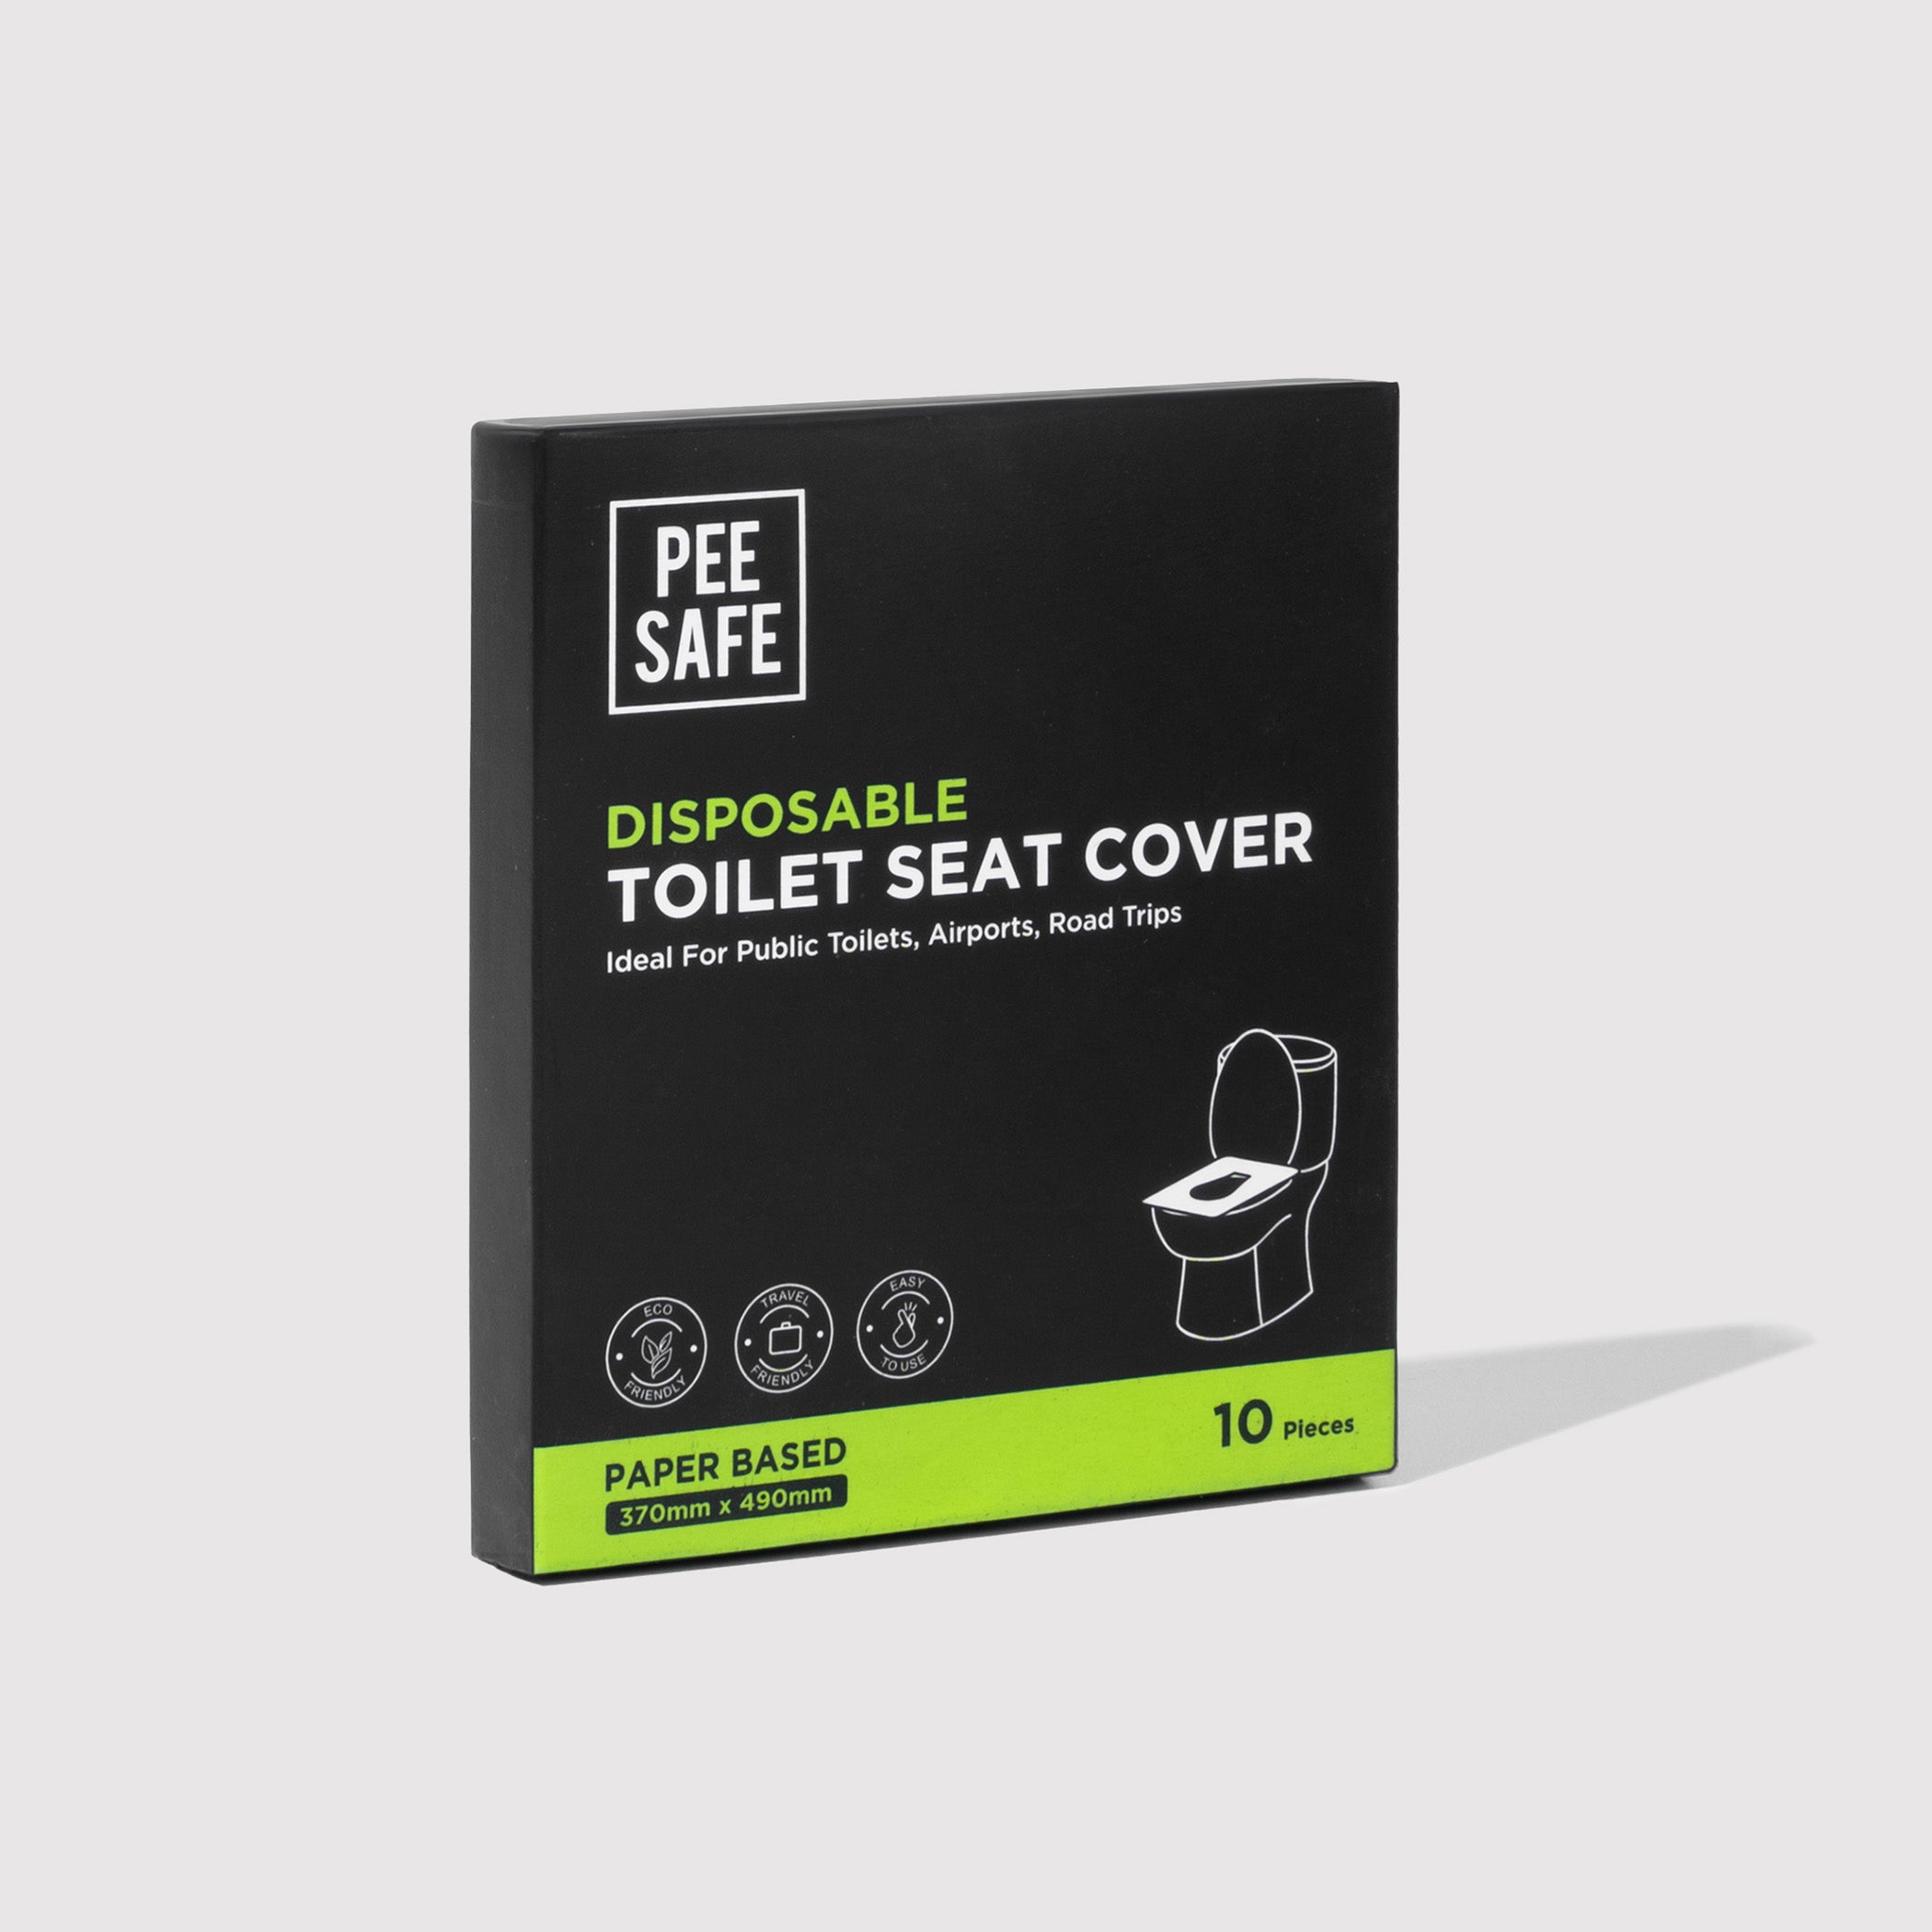 Pee Safe Disposable Toilet Seat Cover (10N)